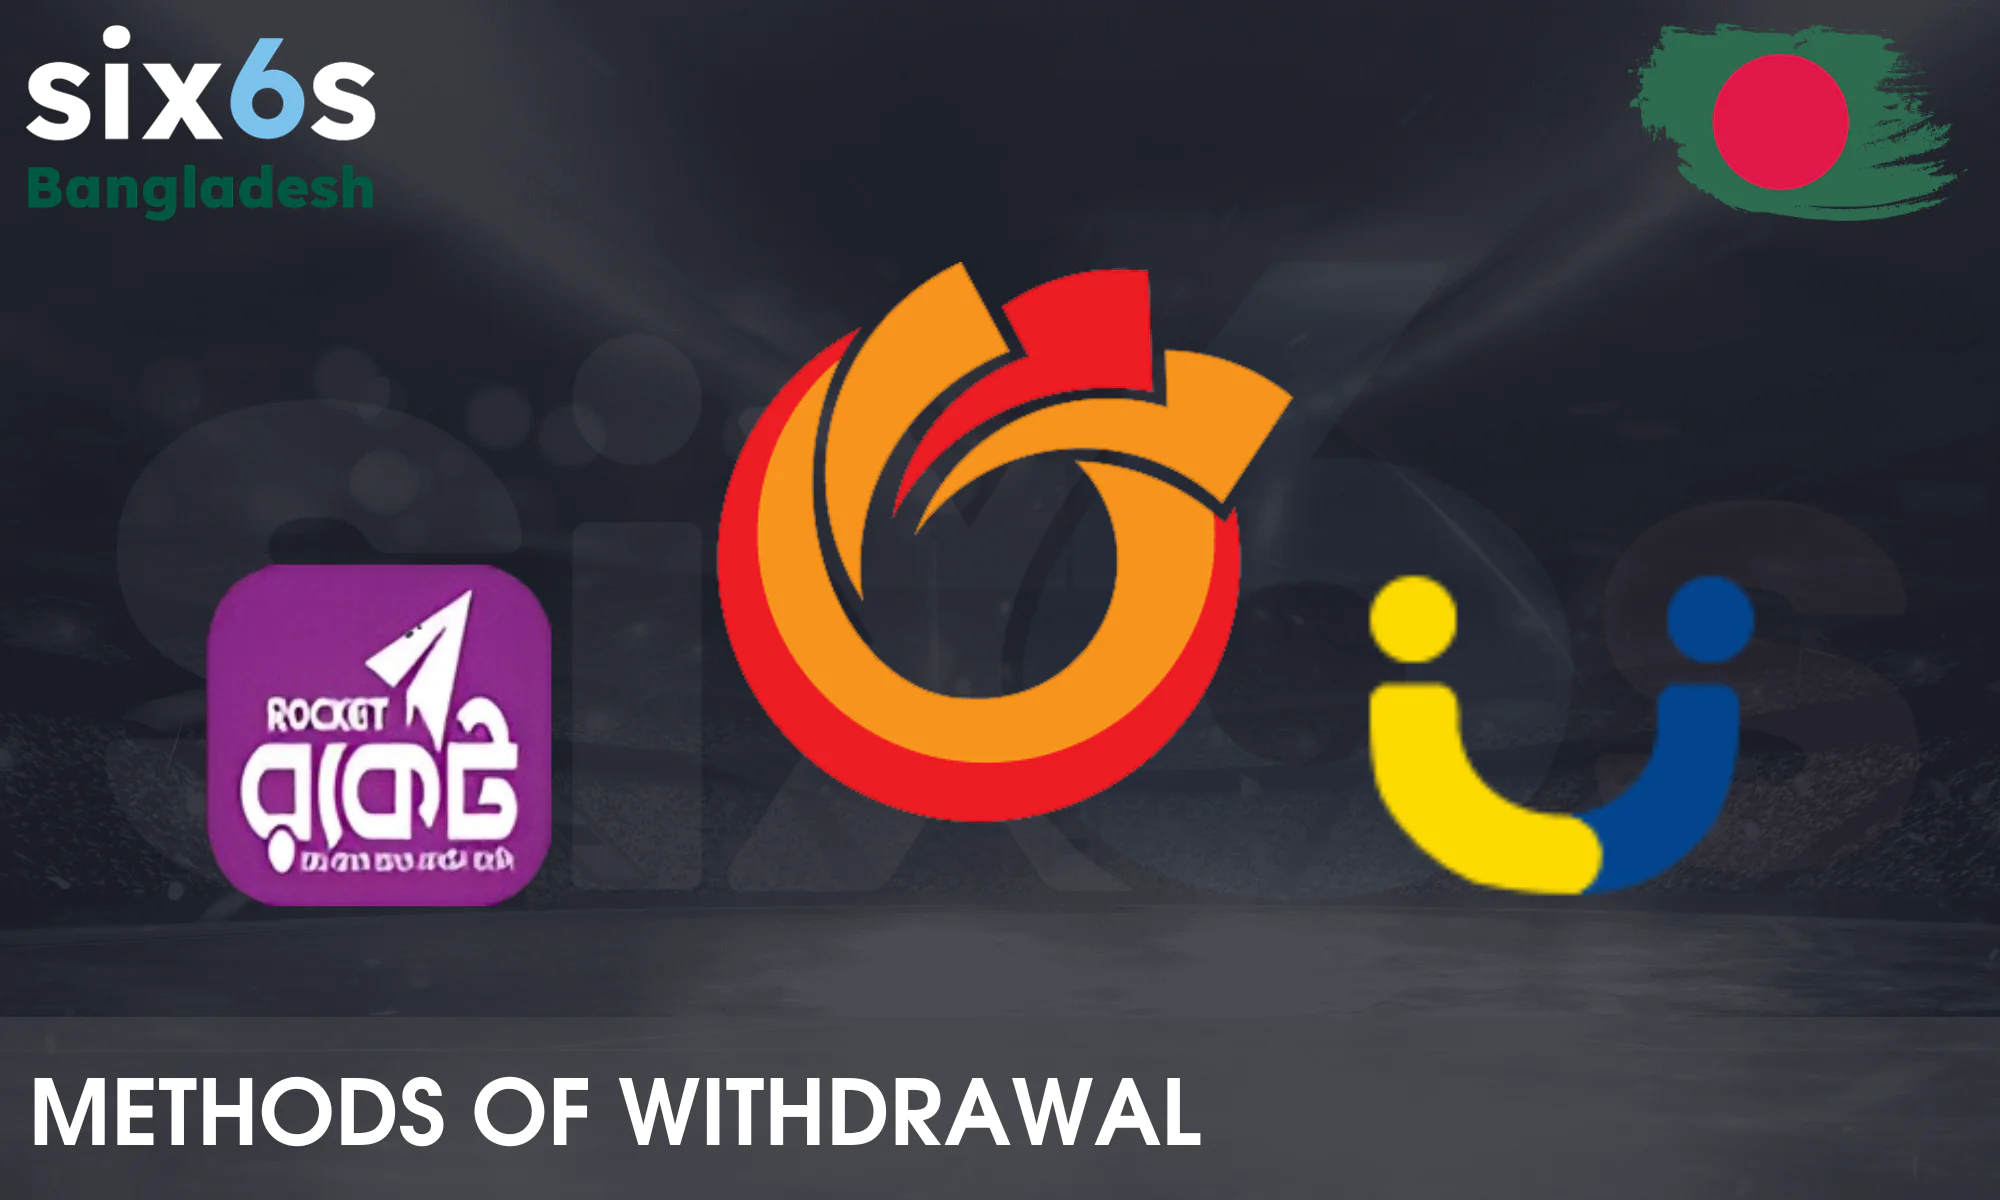 Withdrawal methods available at Six6s